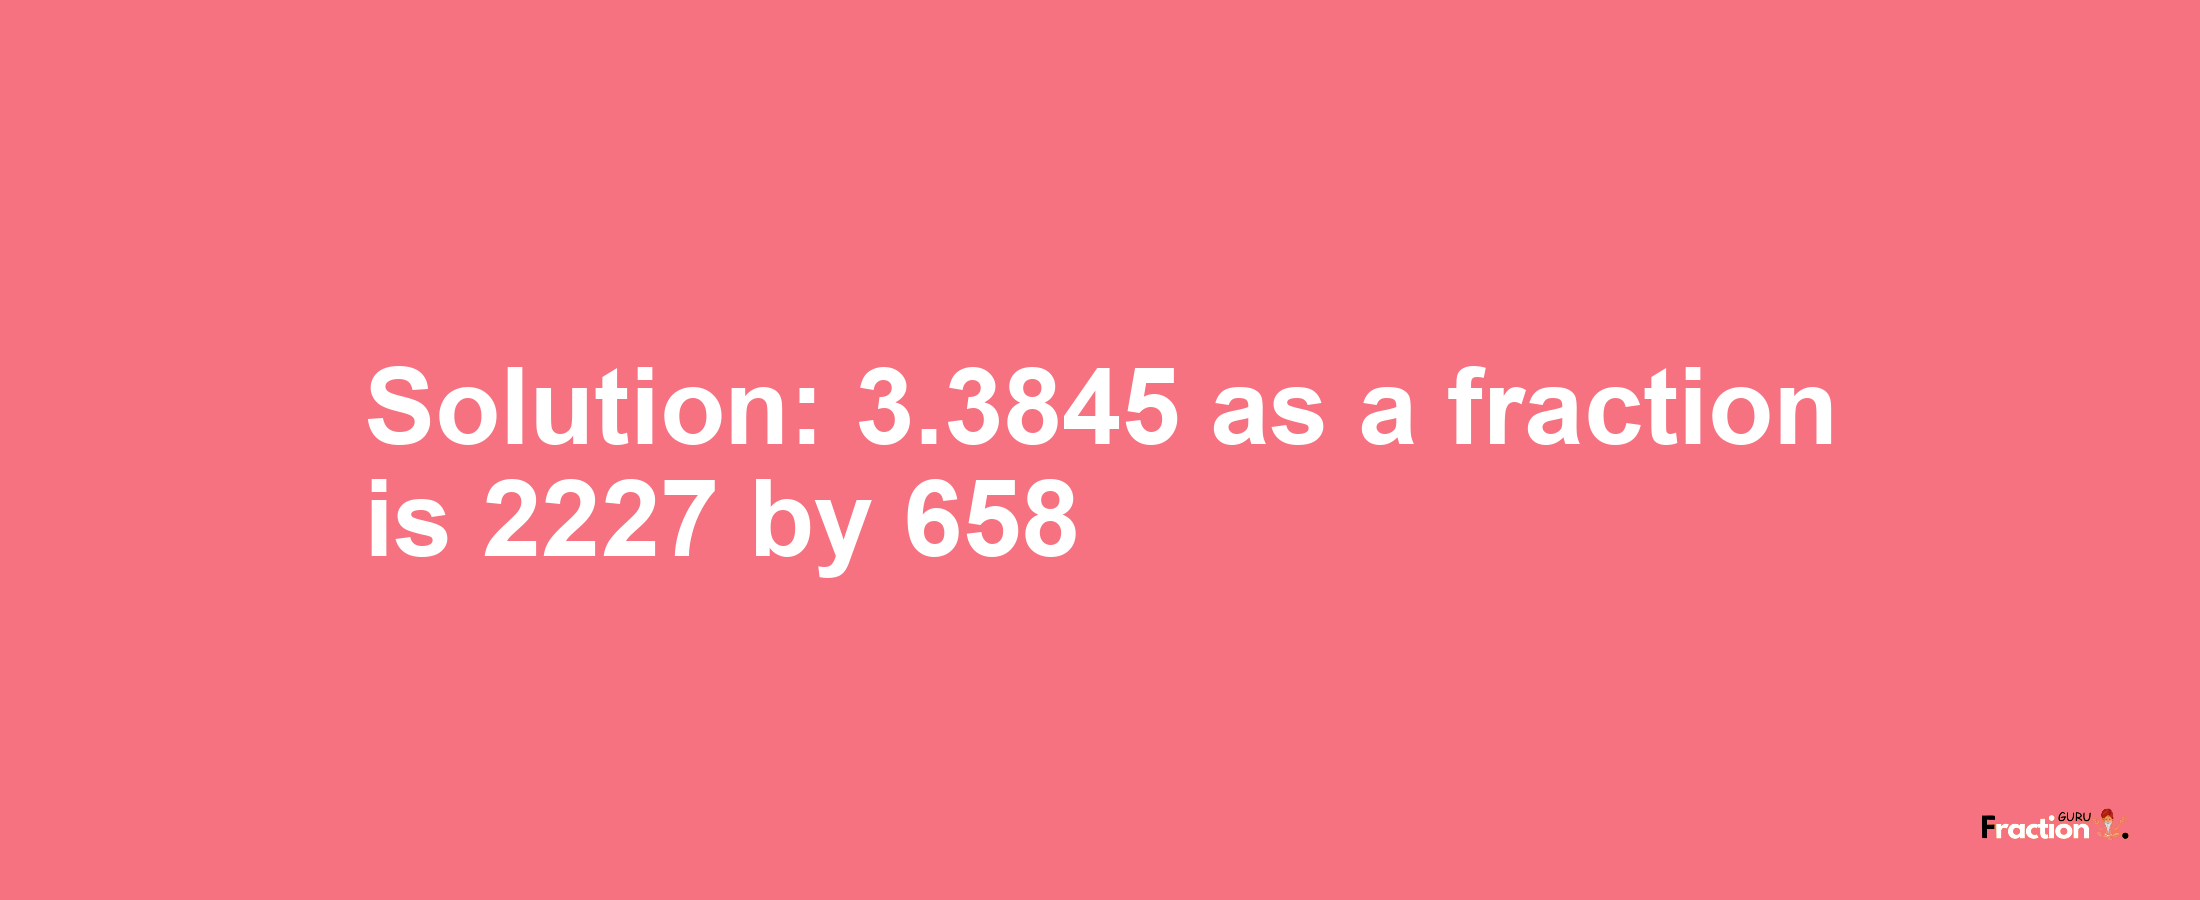 Solution:3.3845 as a fraction is 2227/658